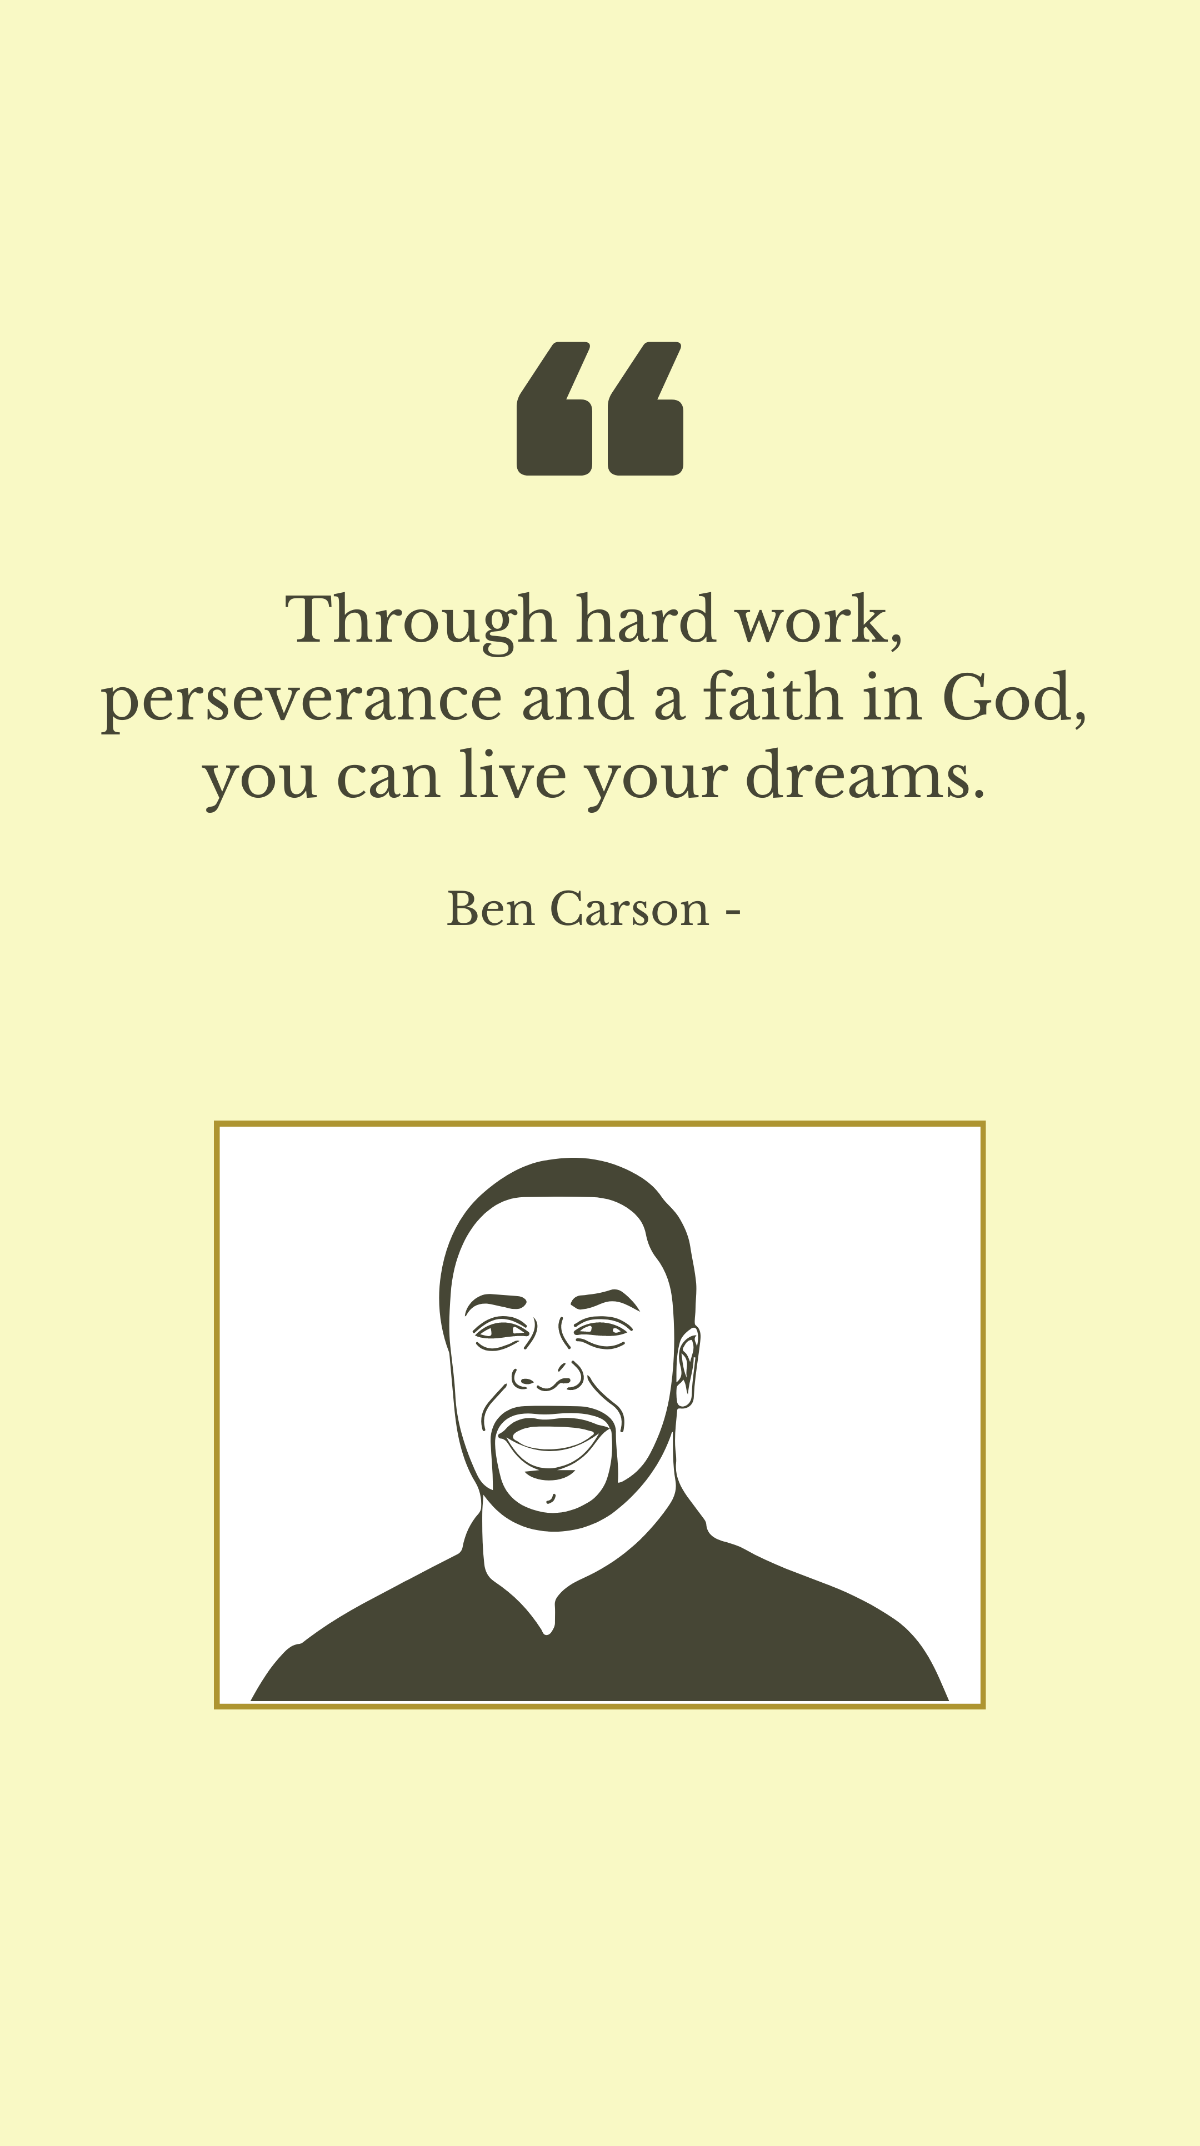 Free Ben Carson - Through hard work, perseverance and a faith in God, you can live your dreams. Template